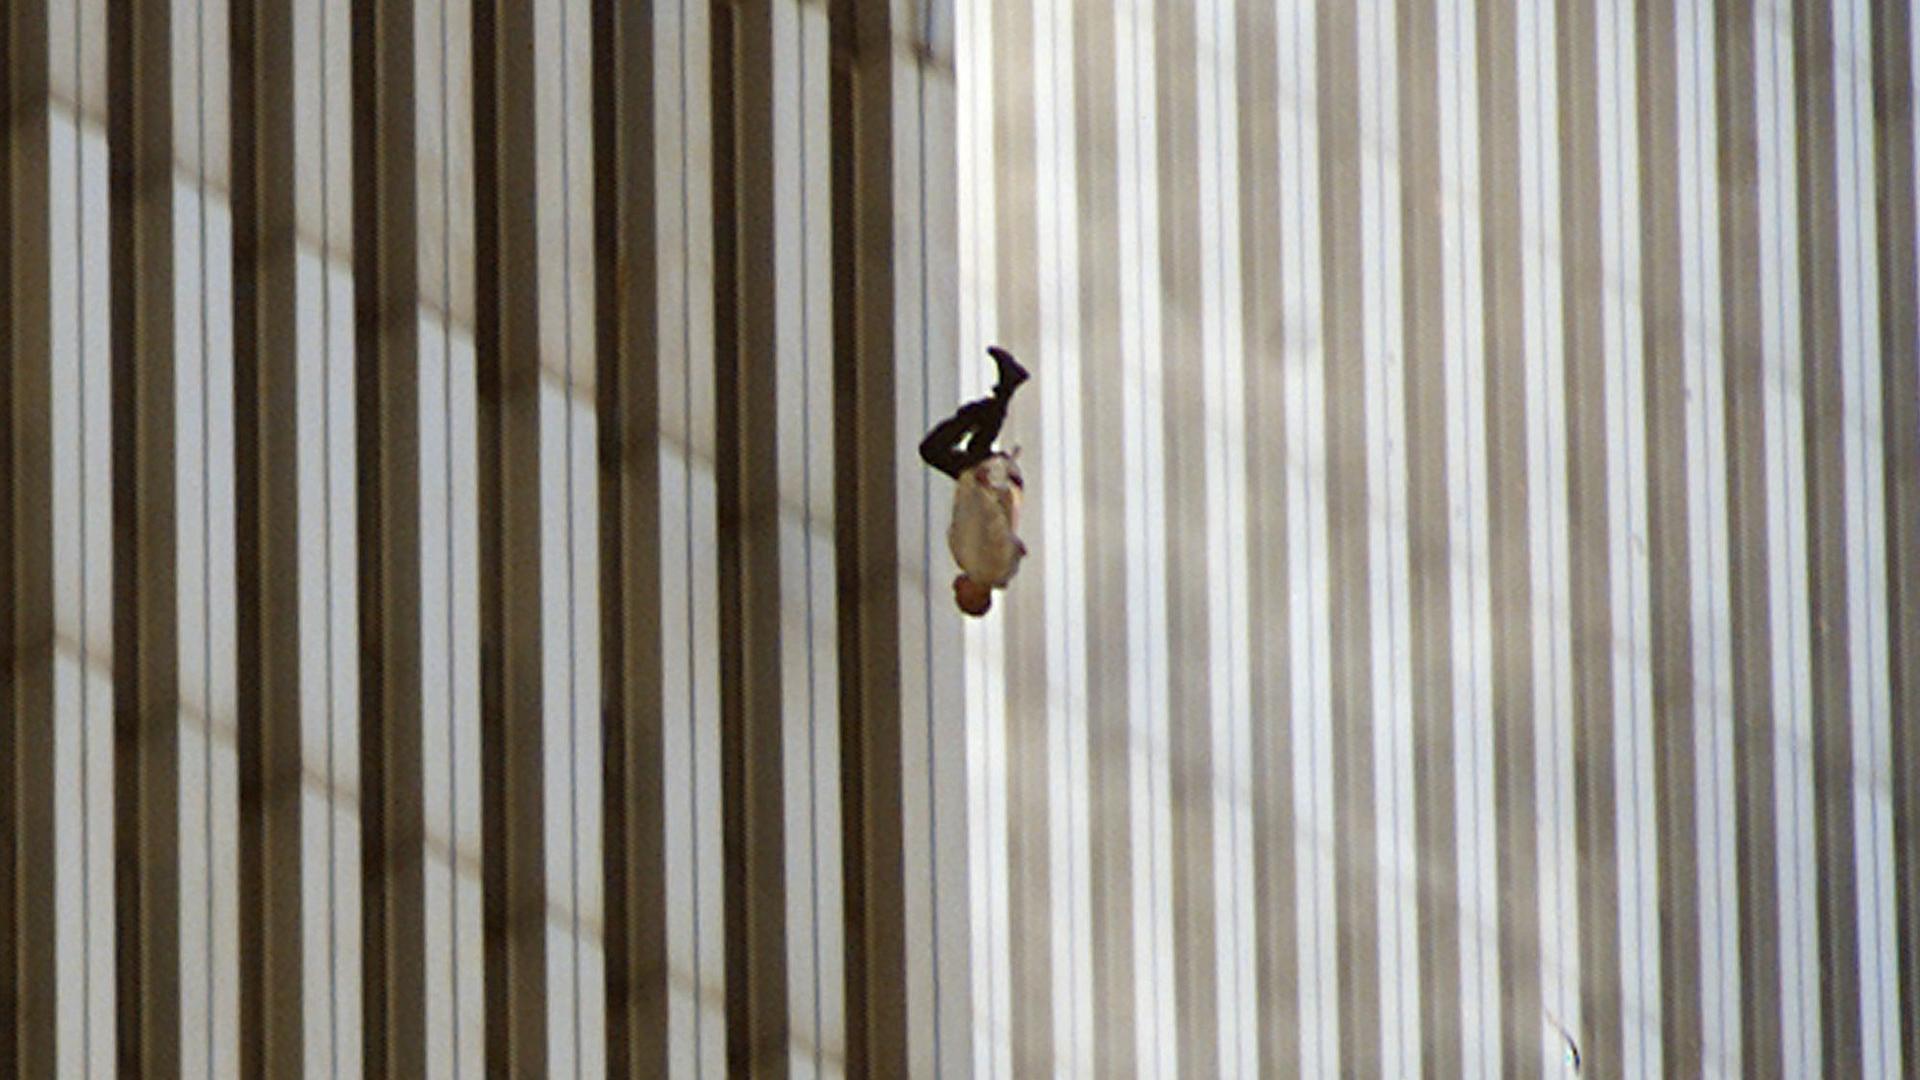 The most famous image to come out of the attacks of September 11 is called “The Falling Man” — it shows a man falling to his death from the North Tower of the World Trade Center. The photograph was published by The New York Times the next day, but the pap